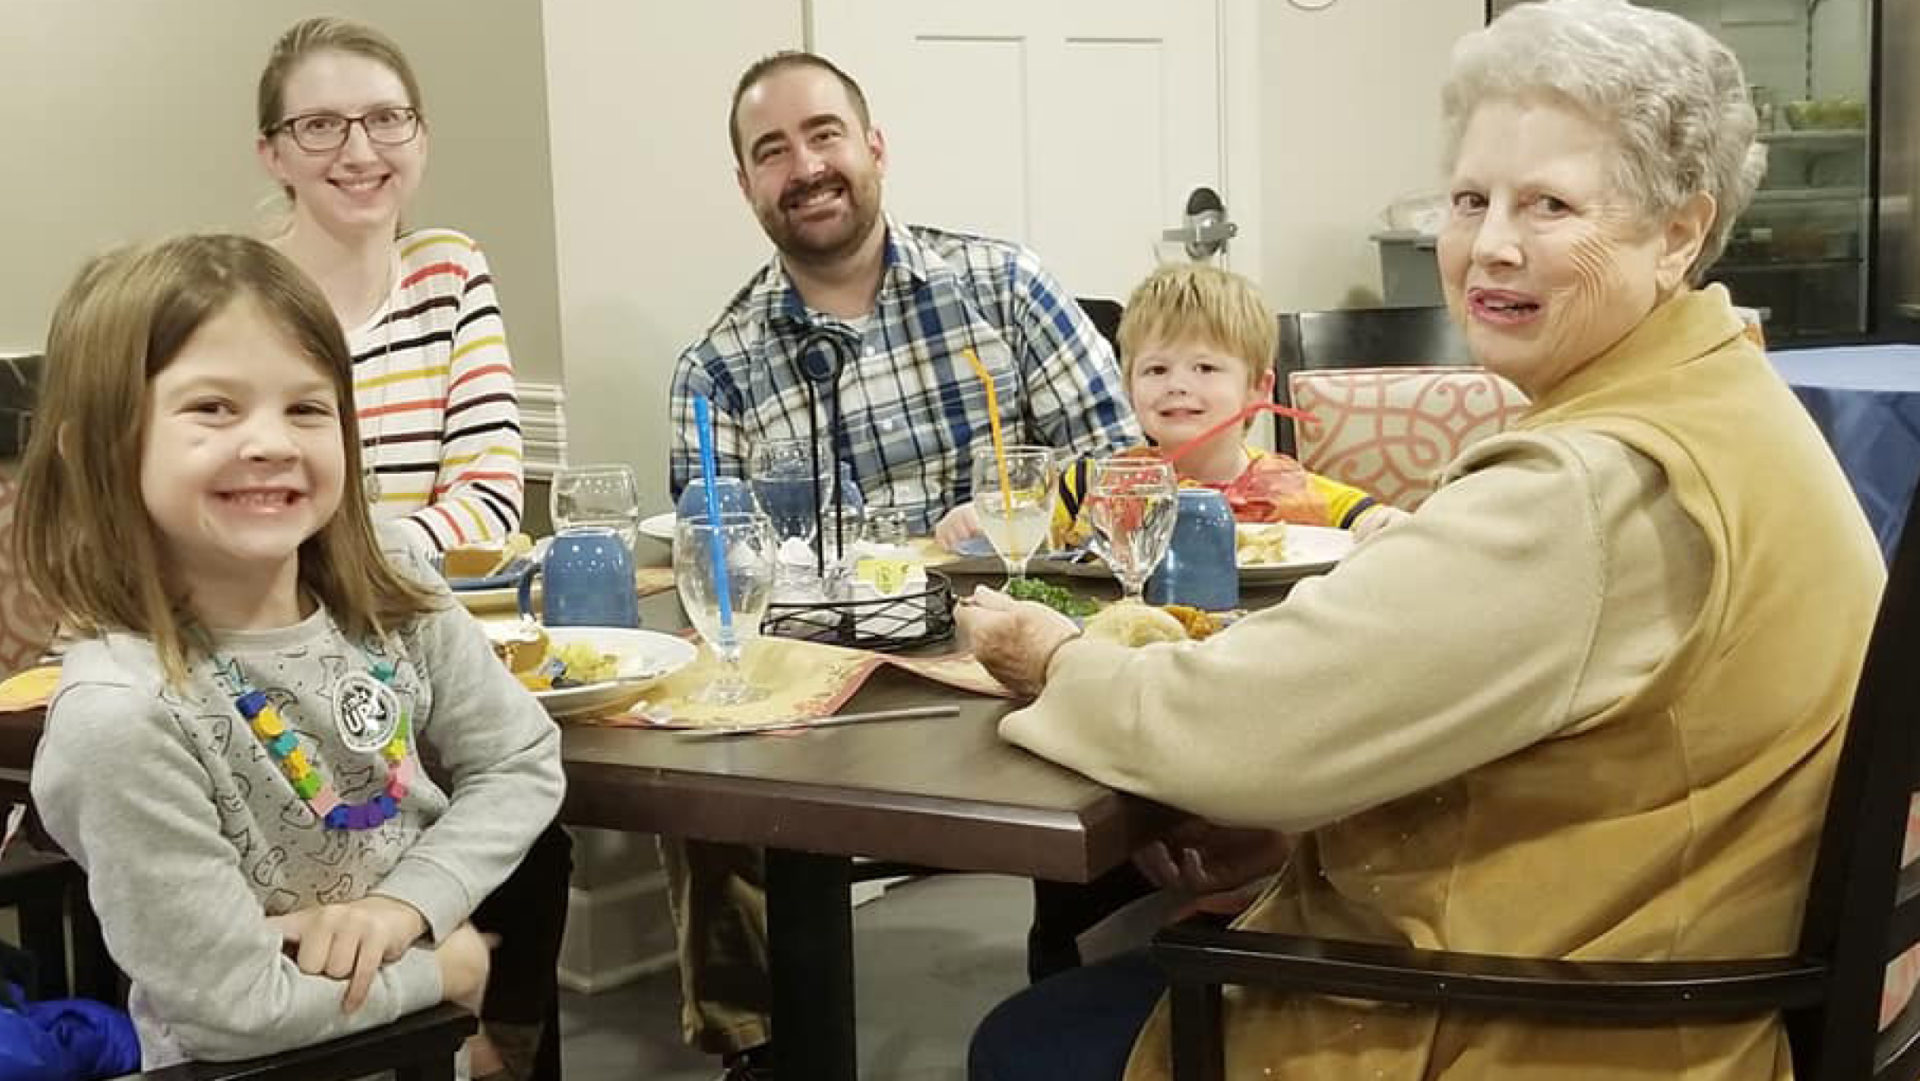 On Thursday, November 8, Cross Creek at Lee’s Summit Assisted Living | Memory Care residents, staff and family members gathered together to celebrate the community’s first Thanksgiving.